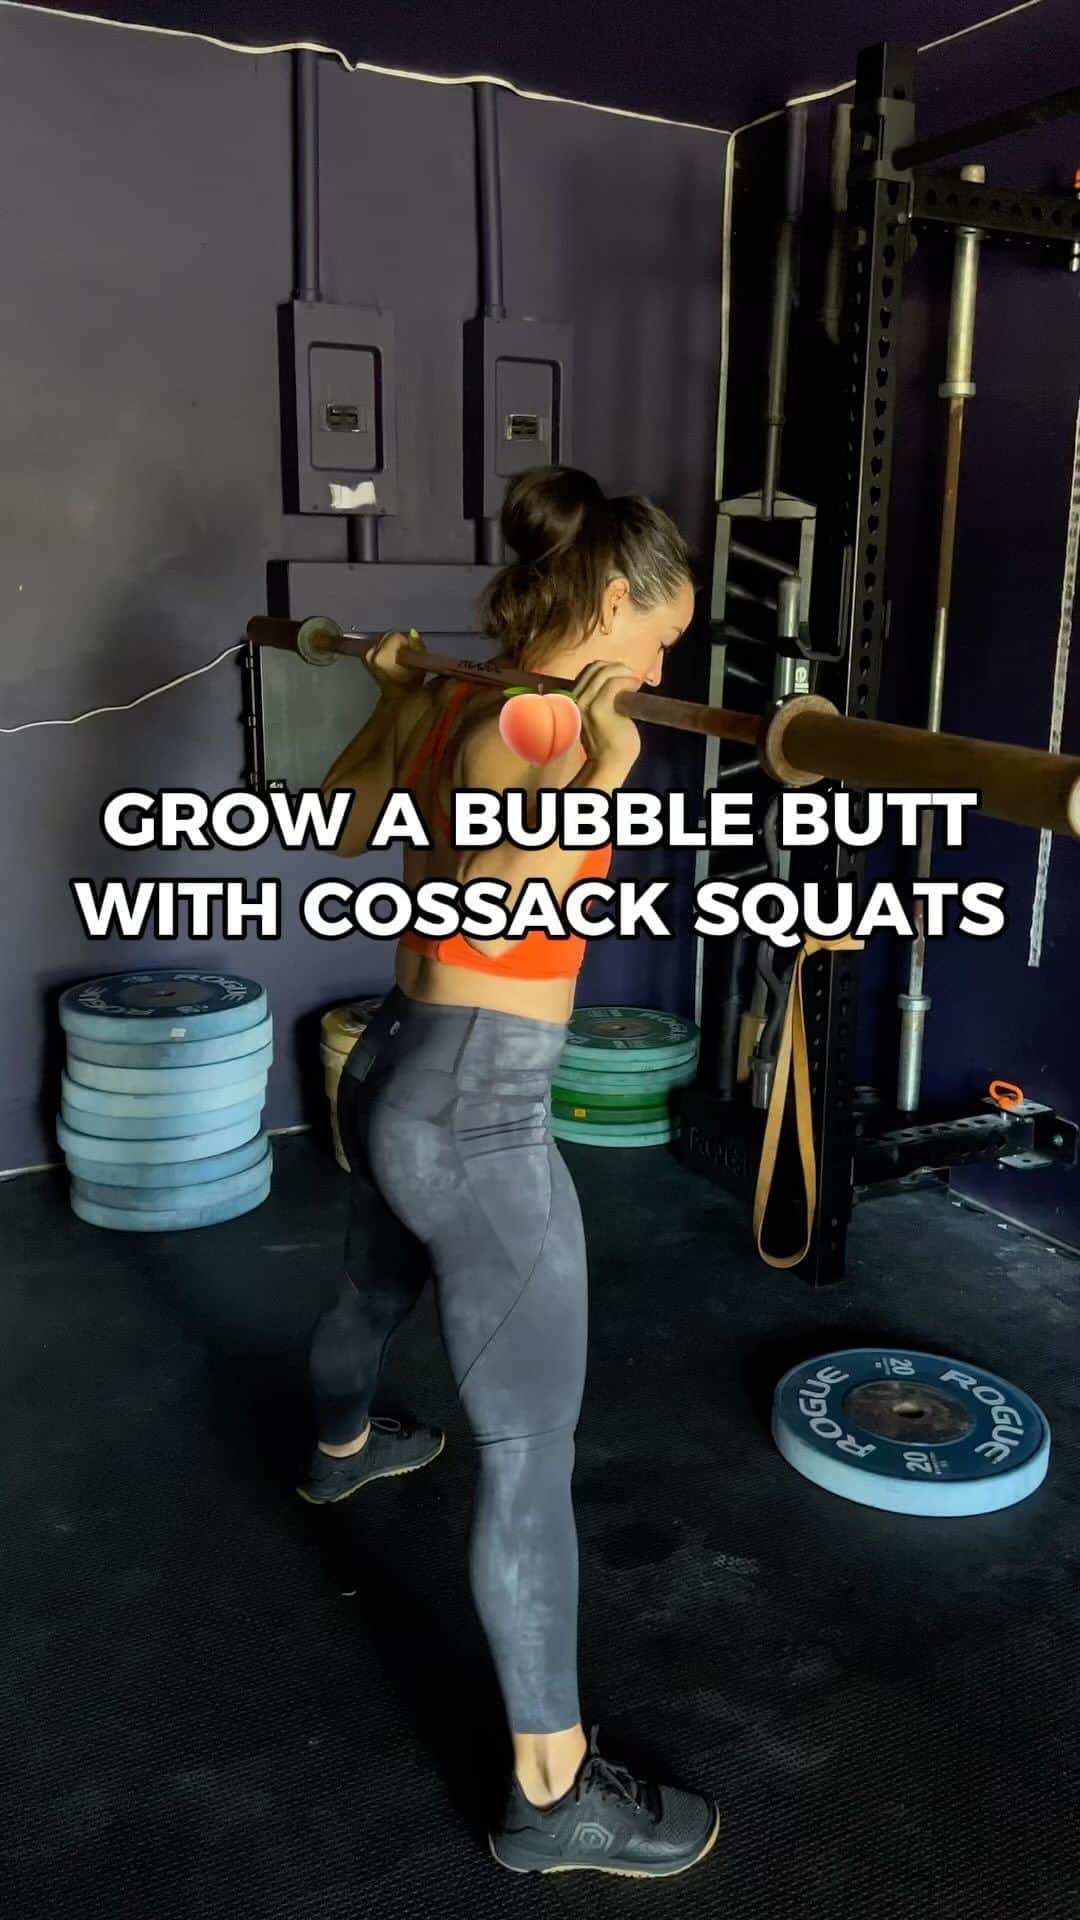 Camille Leblanc-Bazinetのインスタグラム：「I love programming Cossack squat as they are a single leg variation of a squat that really focus on the glute medius muscles. This is the one that gives you a bubble butt 😉   It’s important to include unilateral movements in any training program to increase strength while developing balanced musculature.  Two of the best ways to make a muscle grow is both by loading it and stretching it, so a very wide range of motion movement like this one will give you get the best of both worlds!  Not only are you gaining strength, you are increasing mobility, flexibility and balance.  Check out my program for more 🔥ferocefitness.com」